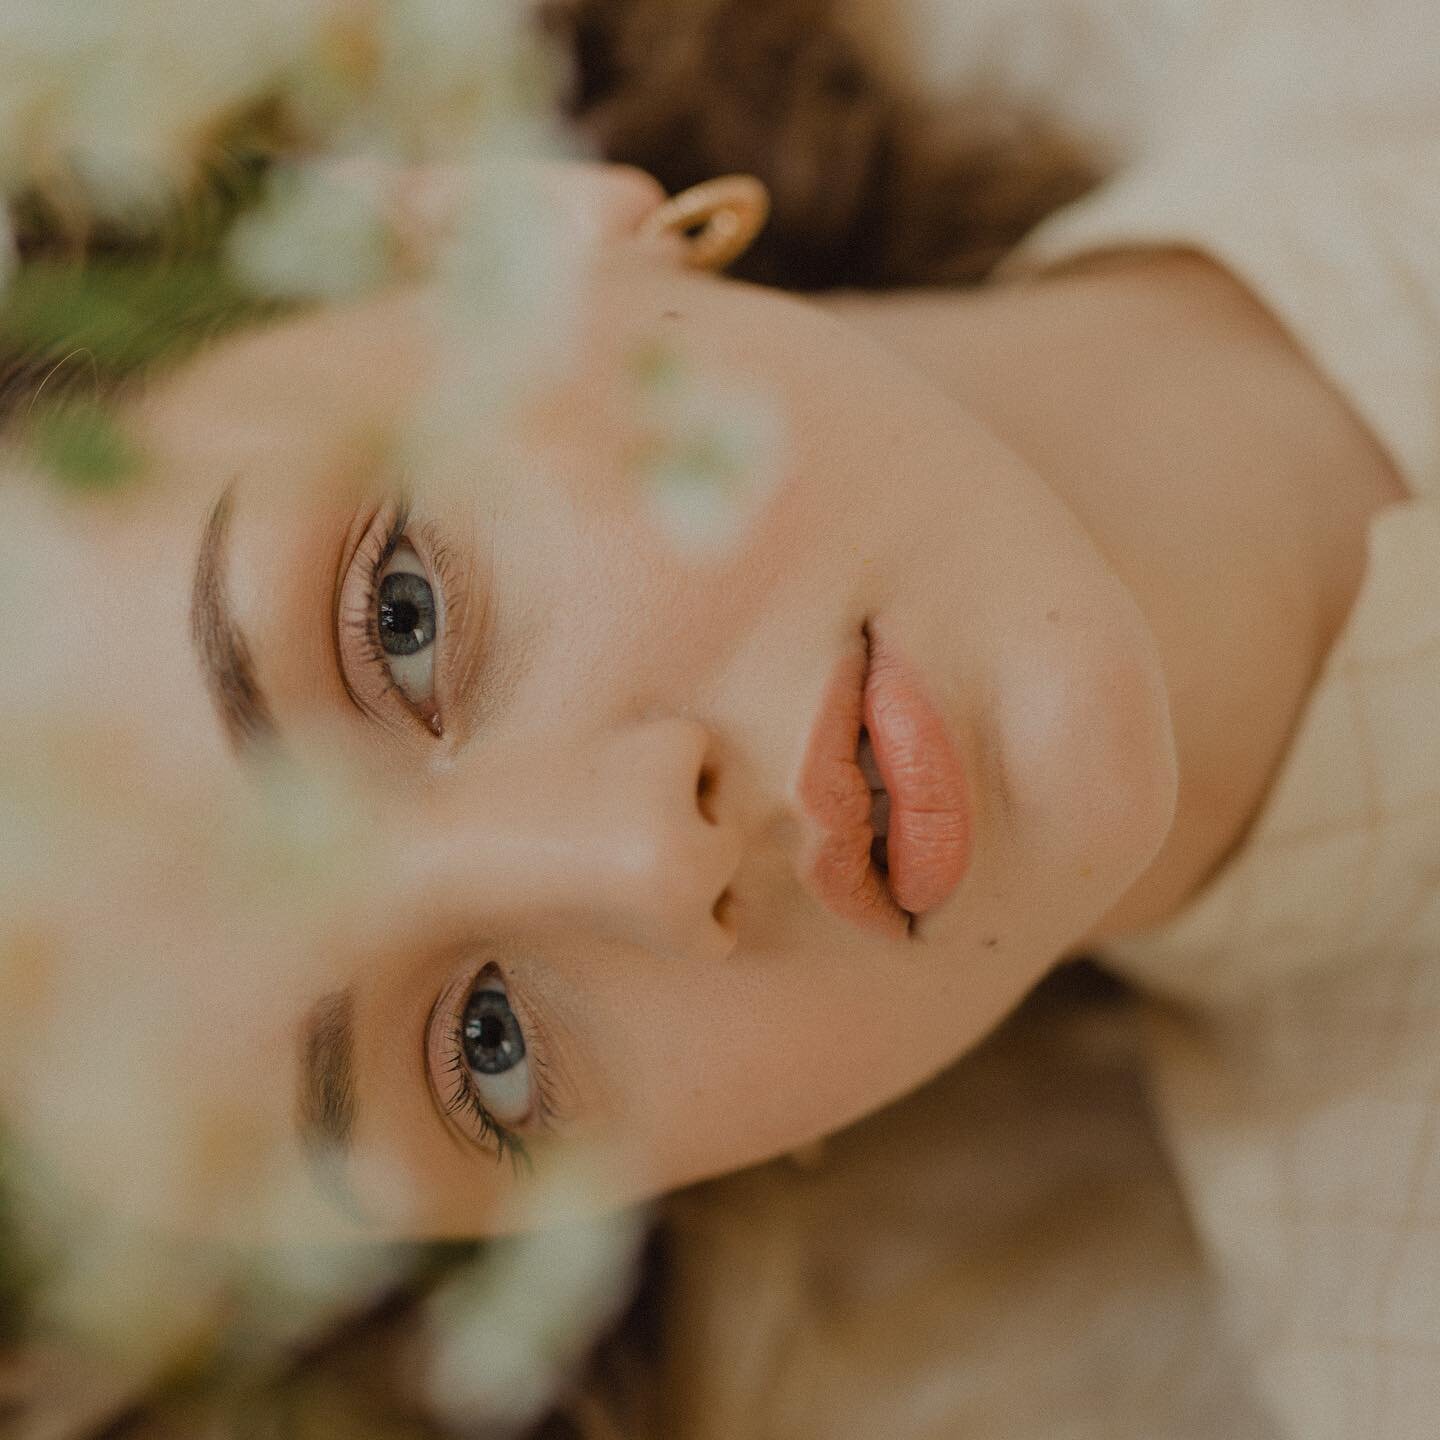 ✨ dreaming of the days we can have a picnic in the tall grass🌾🌿 #freshface
#nomakeupmakeup 
#naturalglow 
#portlandmakeupartist 
#portlandeditorialmakeupartist 
#portlandfashionmakeup #portlandfashionmakeupartish
#freelancemakeupartist 
#stilacream